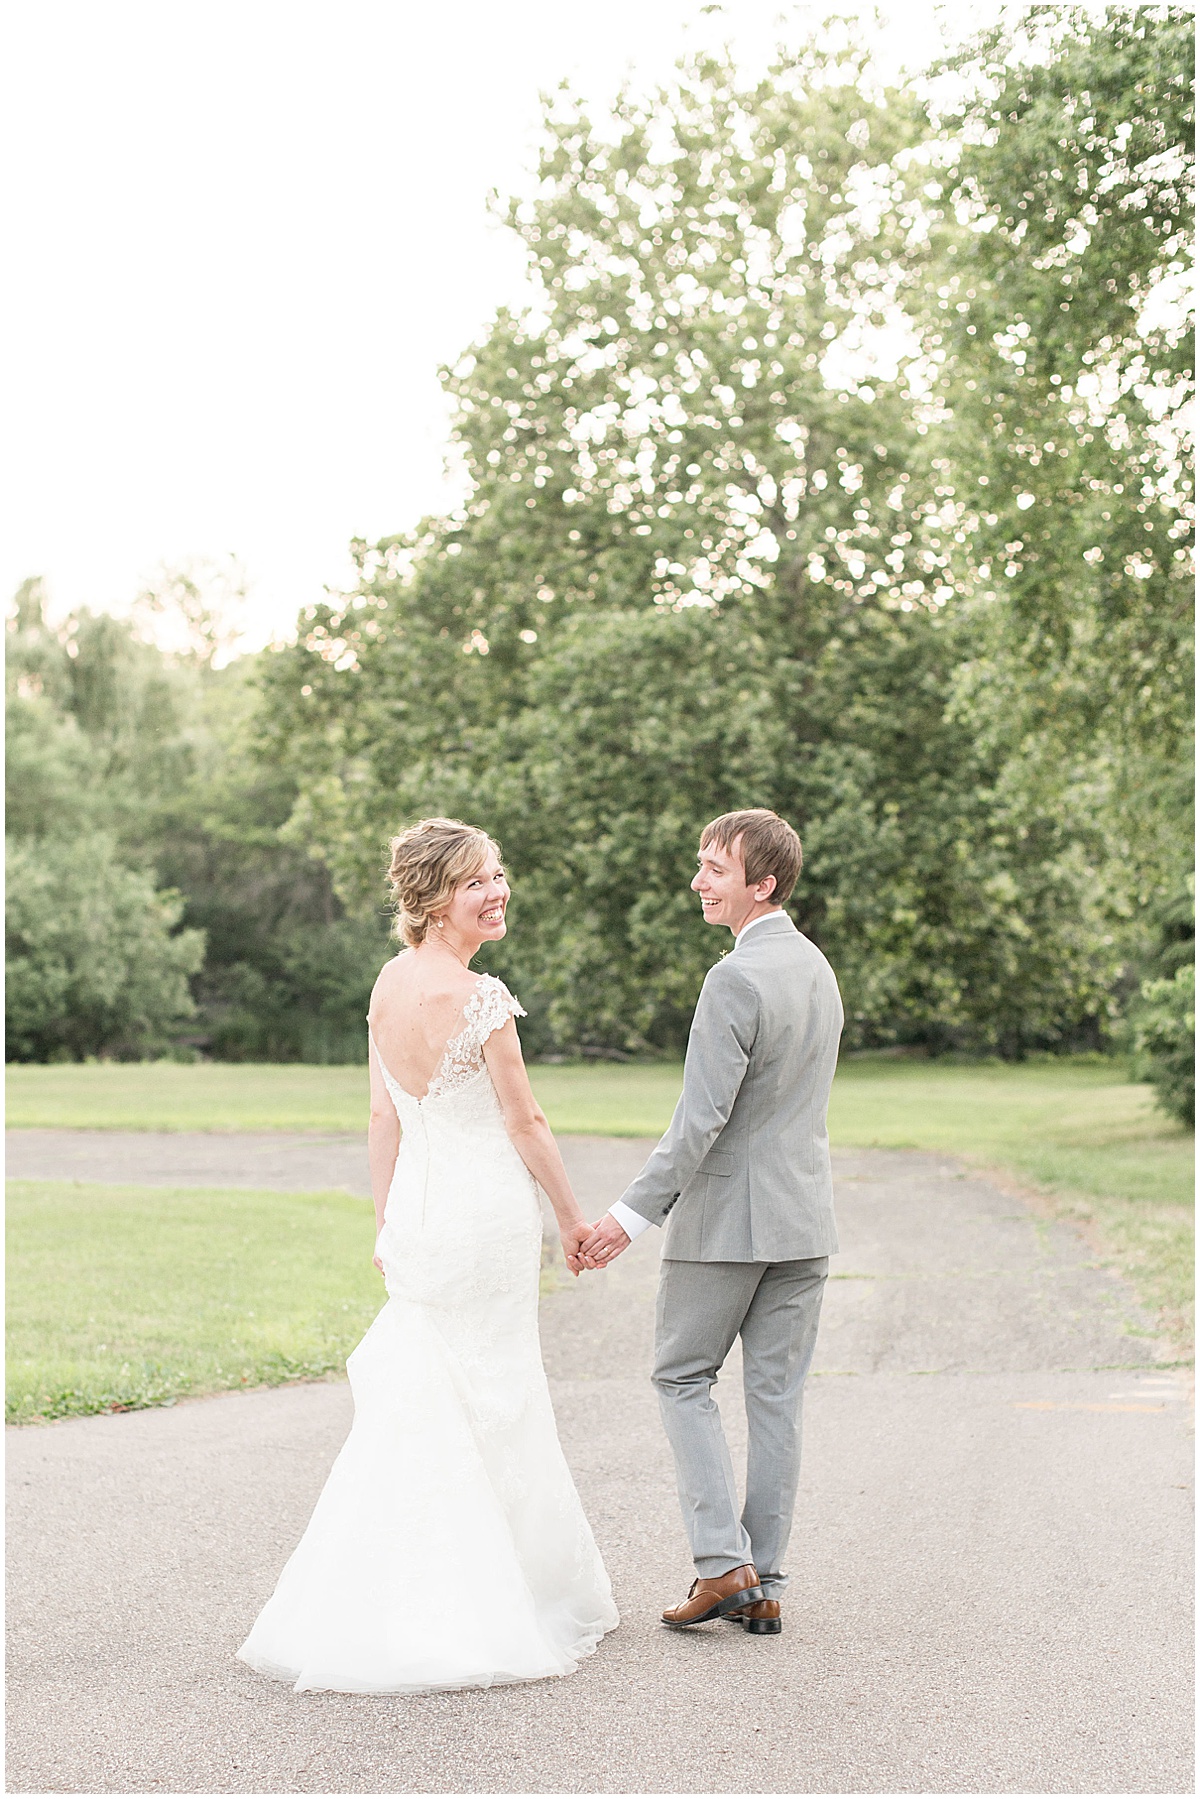 Just married photos after wedding at The Matterhorn in Elkhart, Indiana by Victoria Rayburn Photography